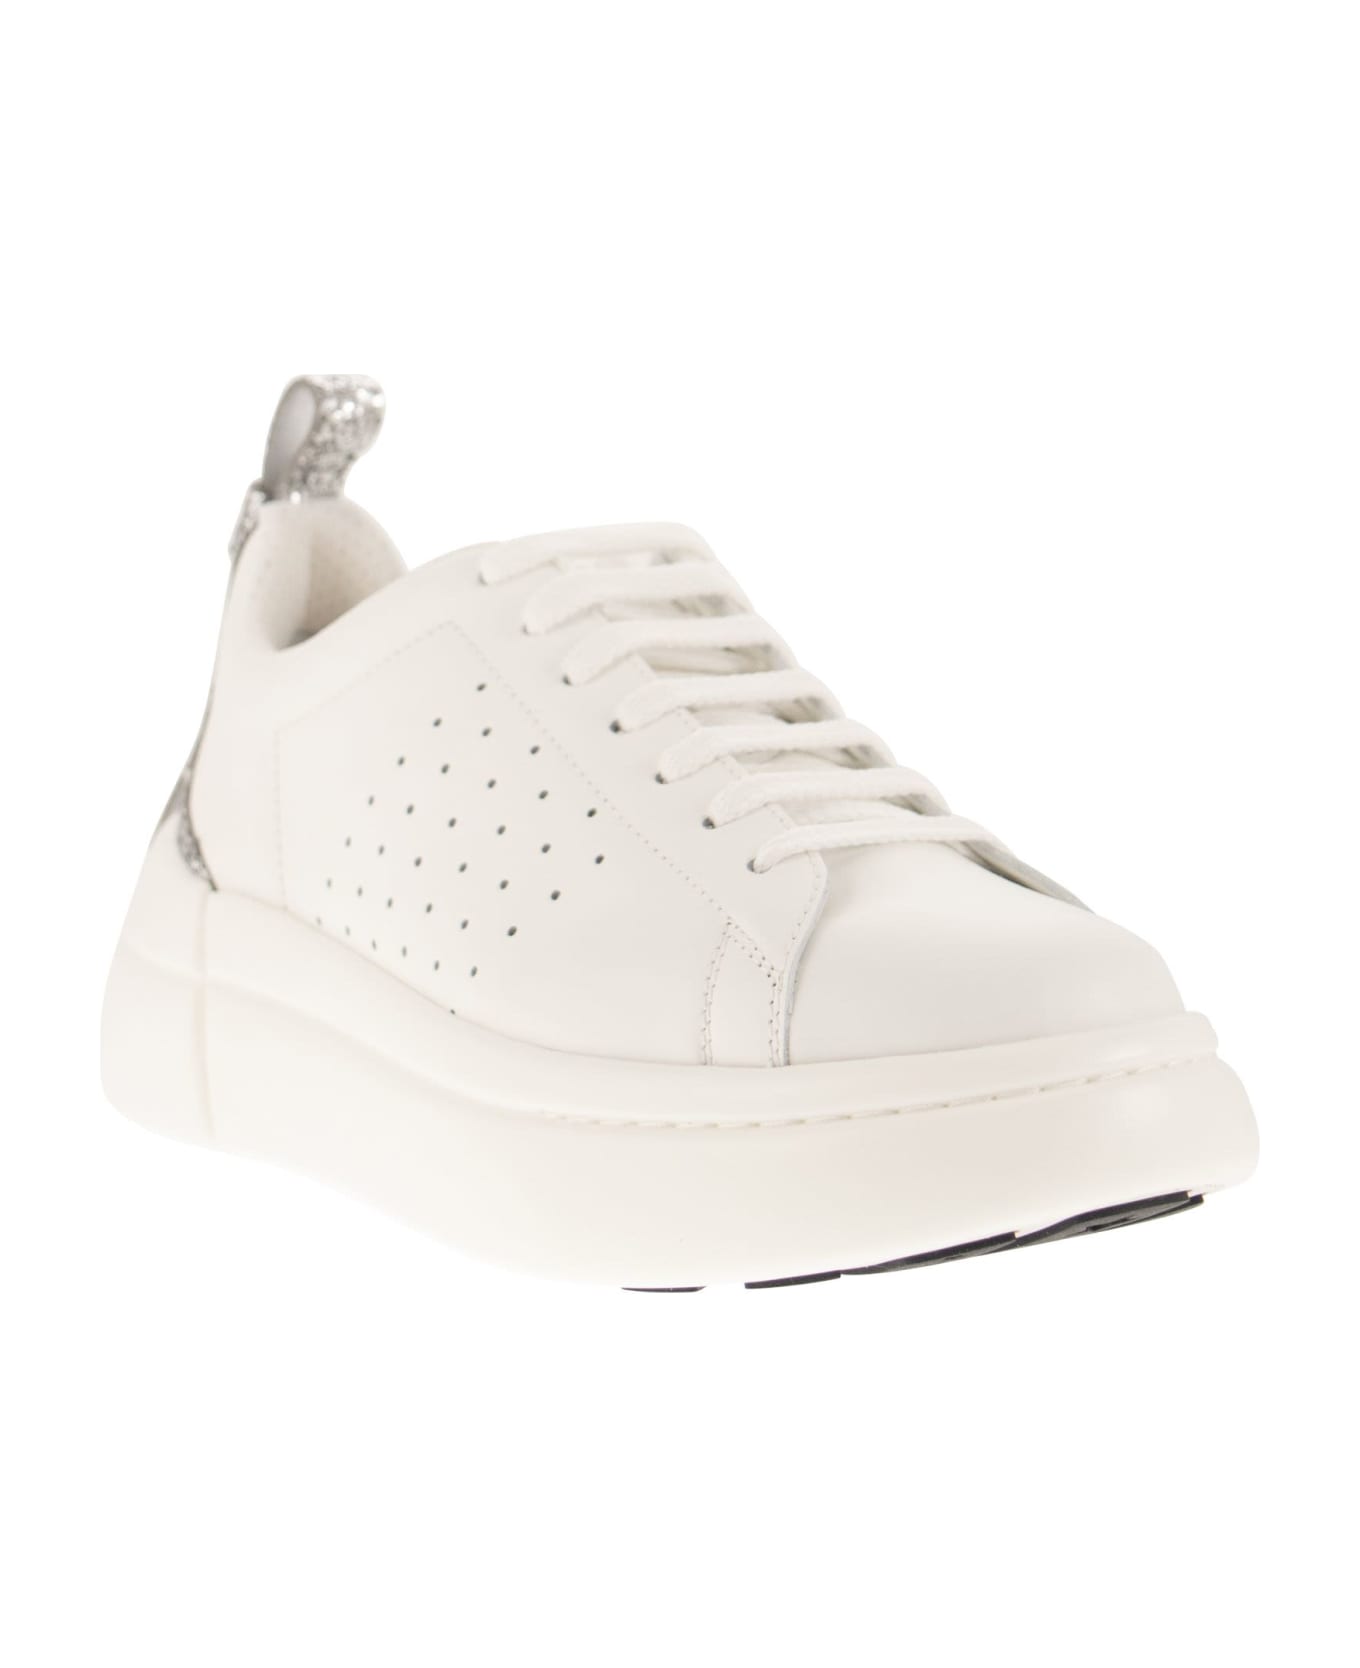 RED Valentino Sneakers Bowalk - White/silver スニーカー